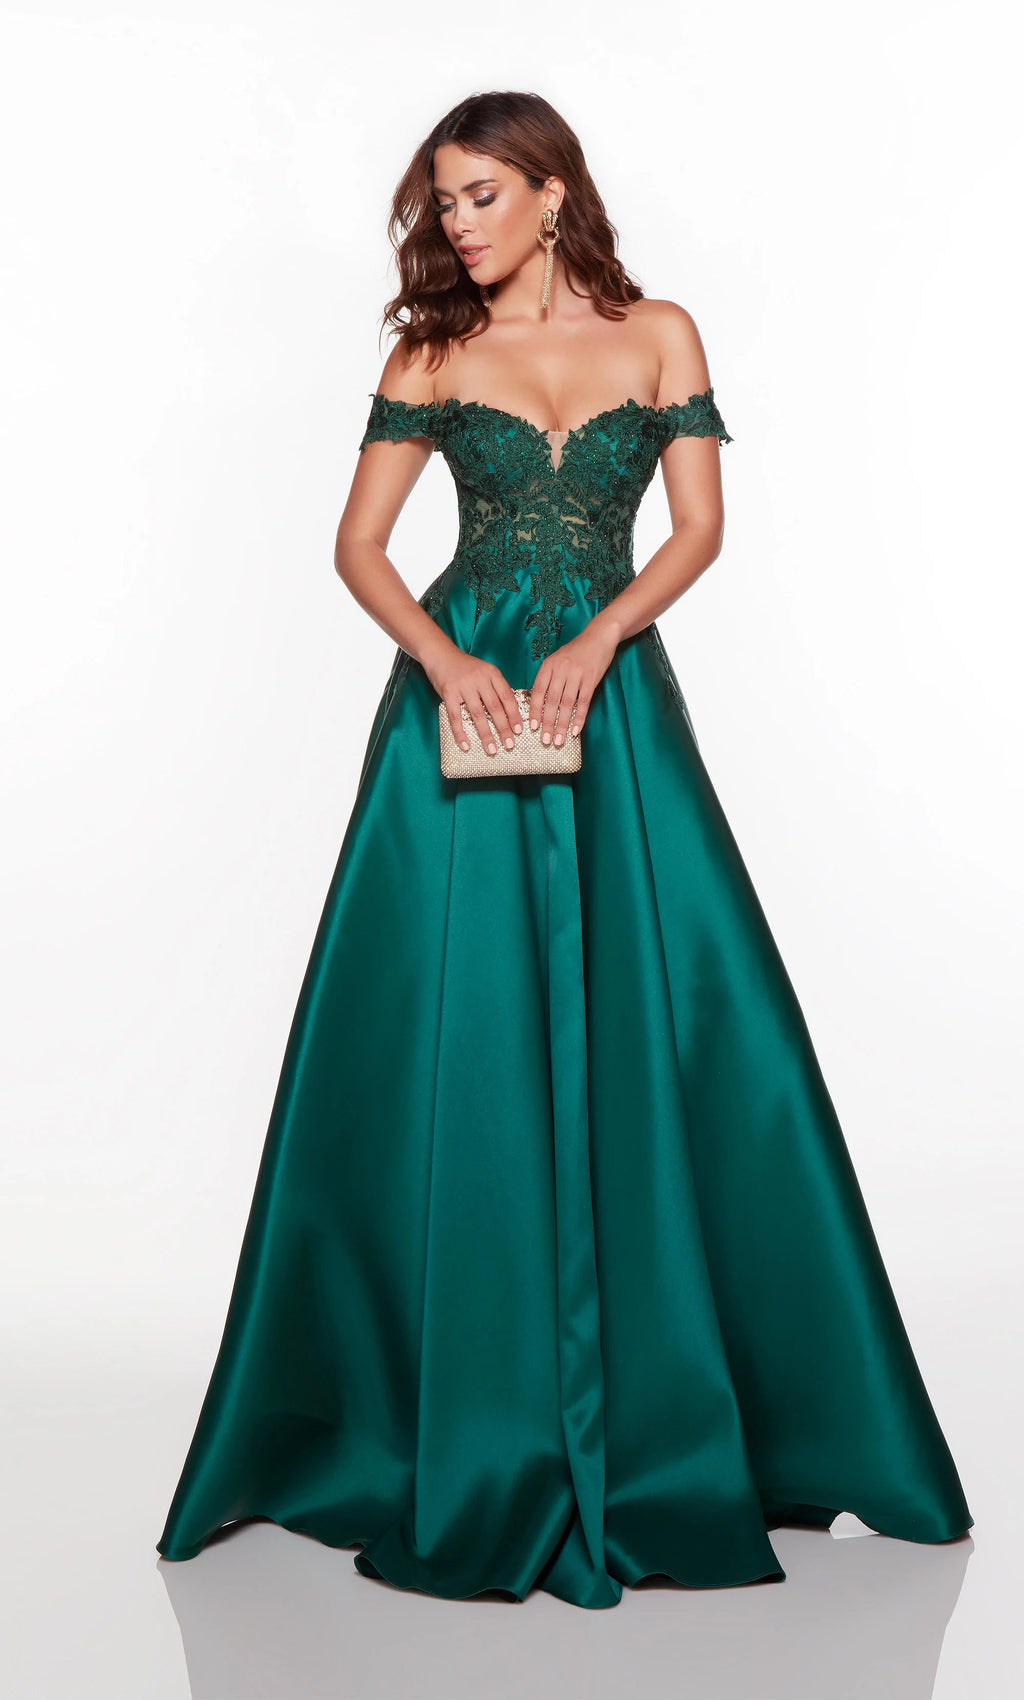 Style 61324 from Alyce Paris is a lovely A-line Mikado gown with a sheer embroidered bodice featuring off the shoulder straps. Show off your fabulous sense of style when you wear this gorgeous gown to prom this year!